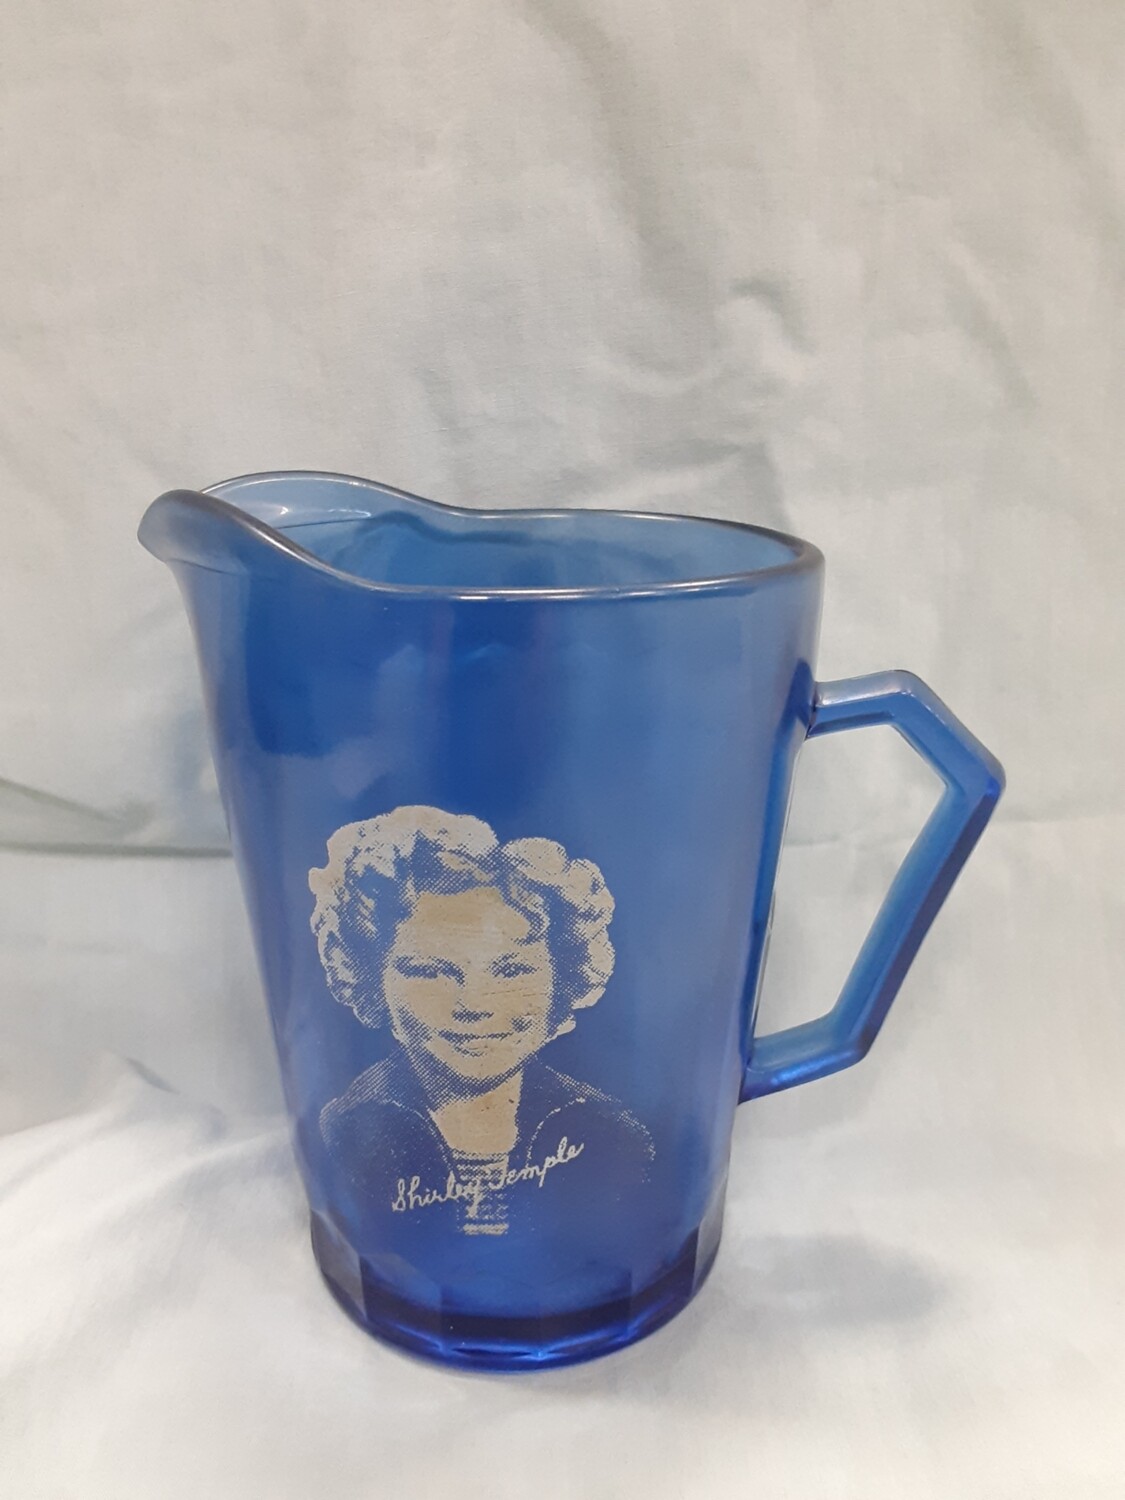 Shirley Temple Cream pitcher